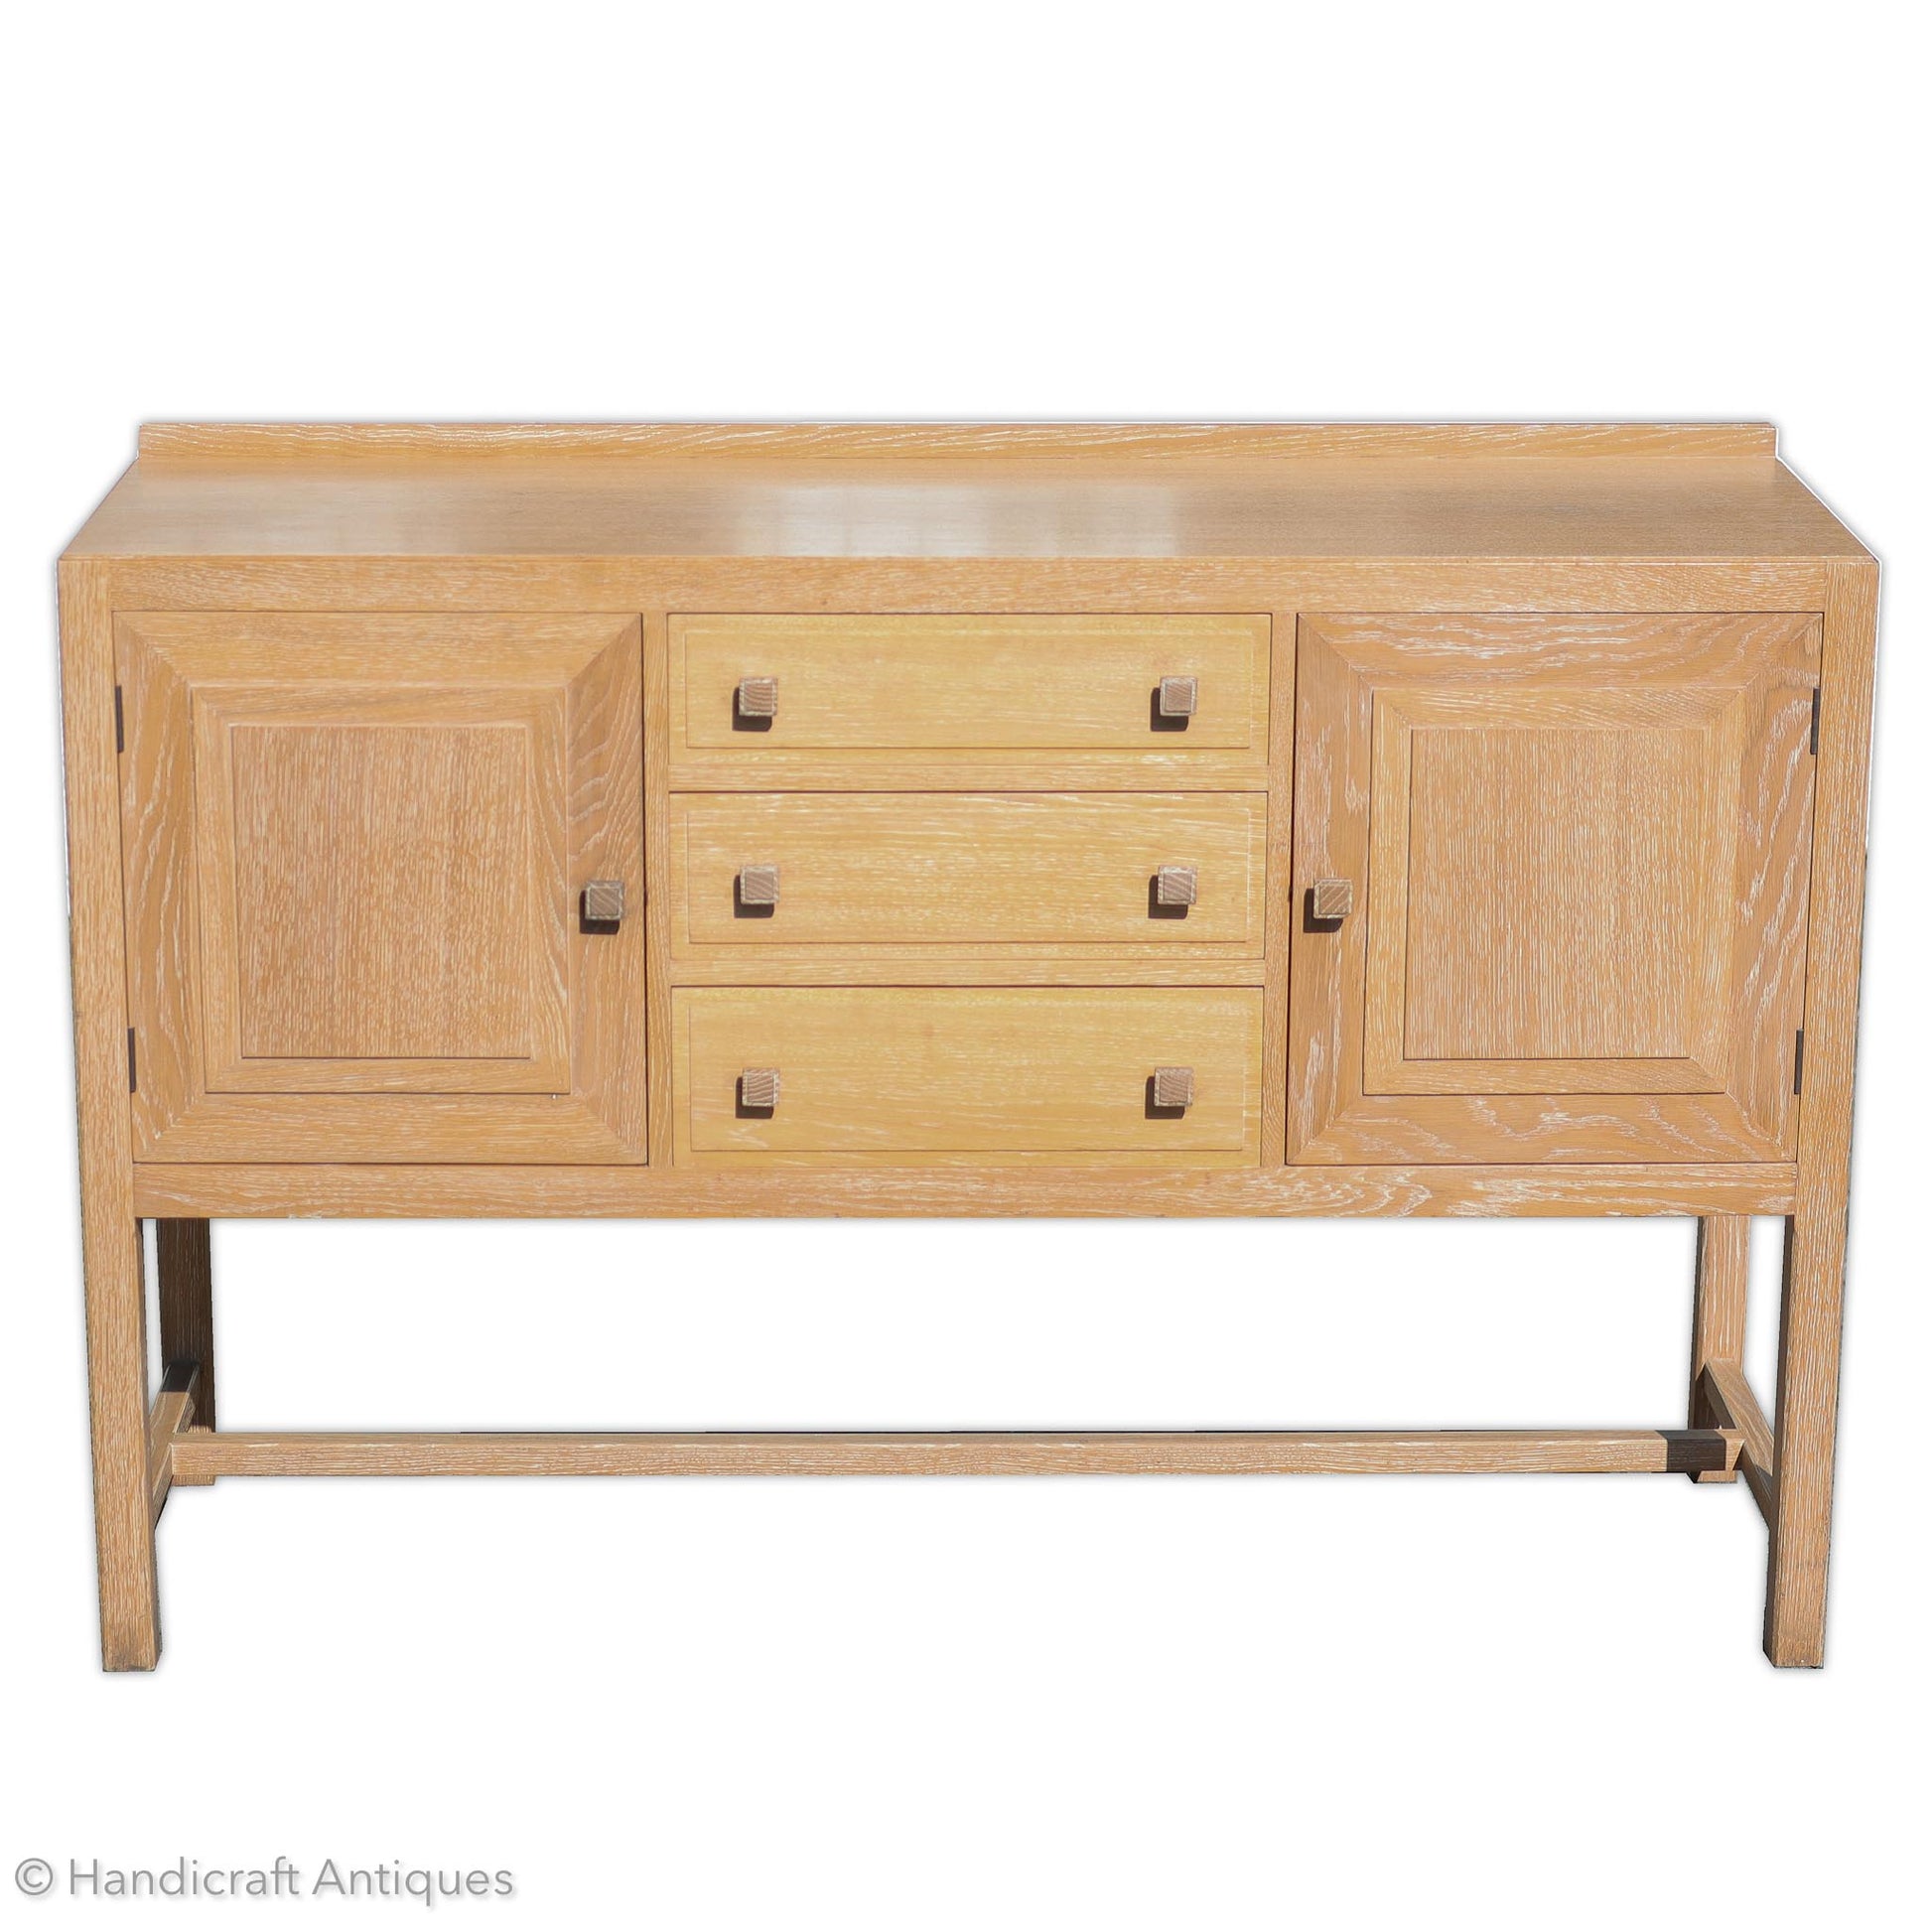 Heal and Co [Ambrose Heal] Arts & Crafts Cotswold School English Oak Sideboard 